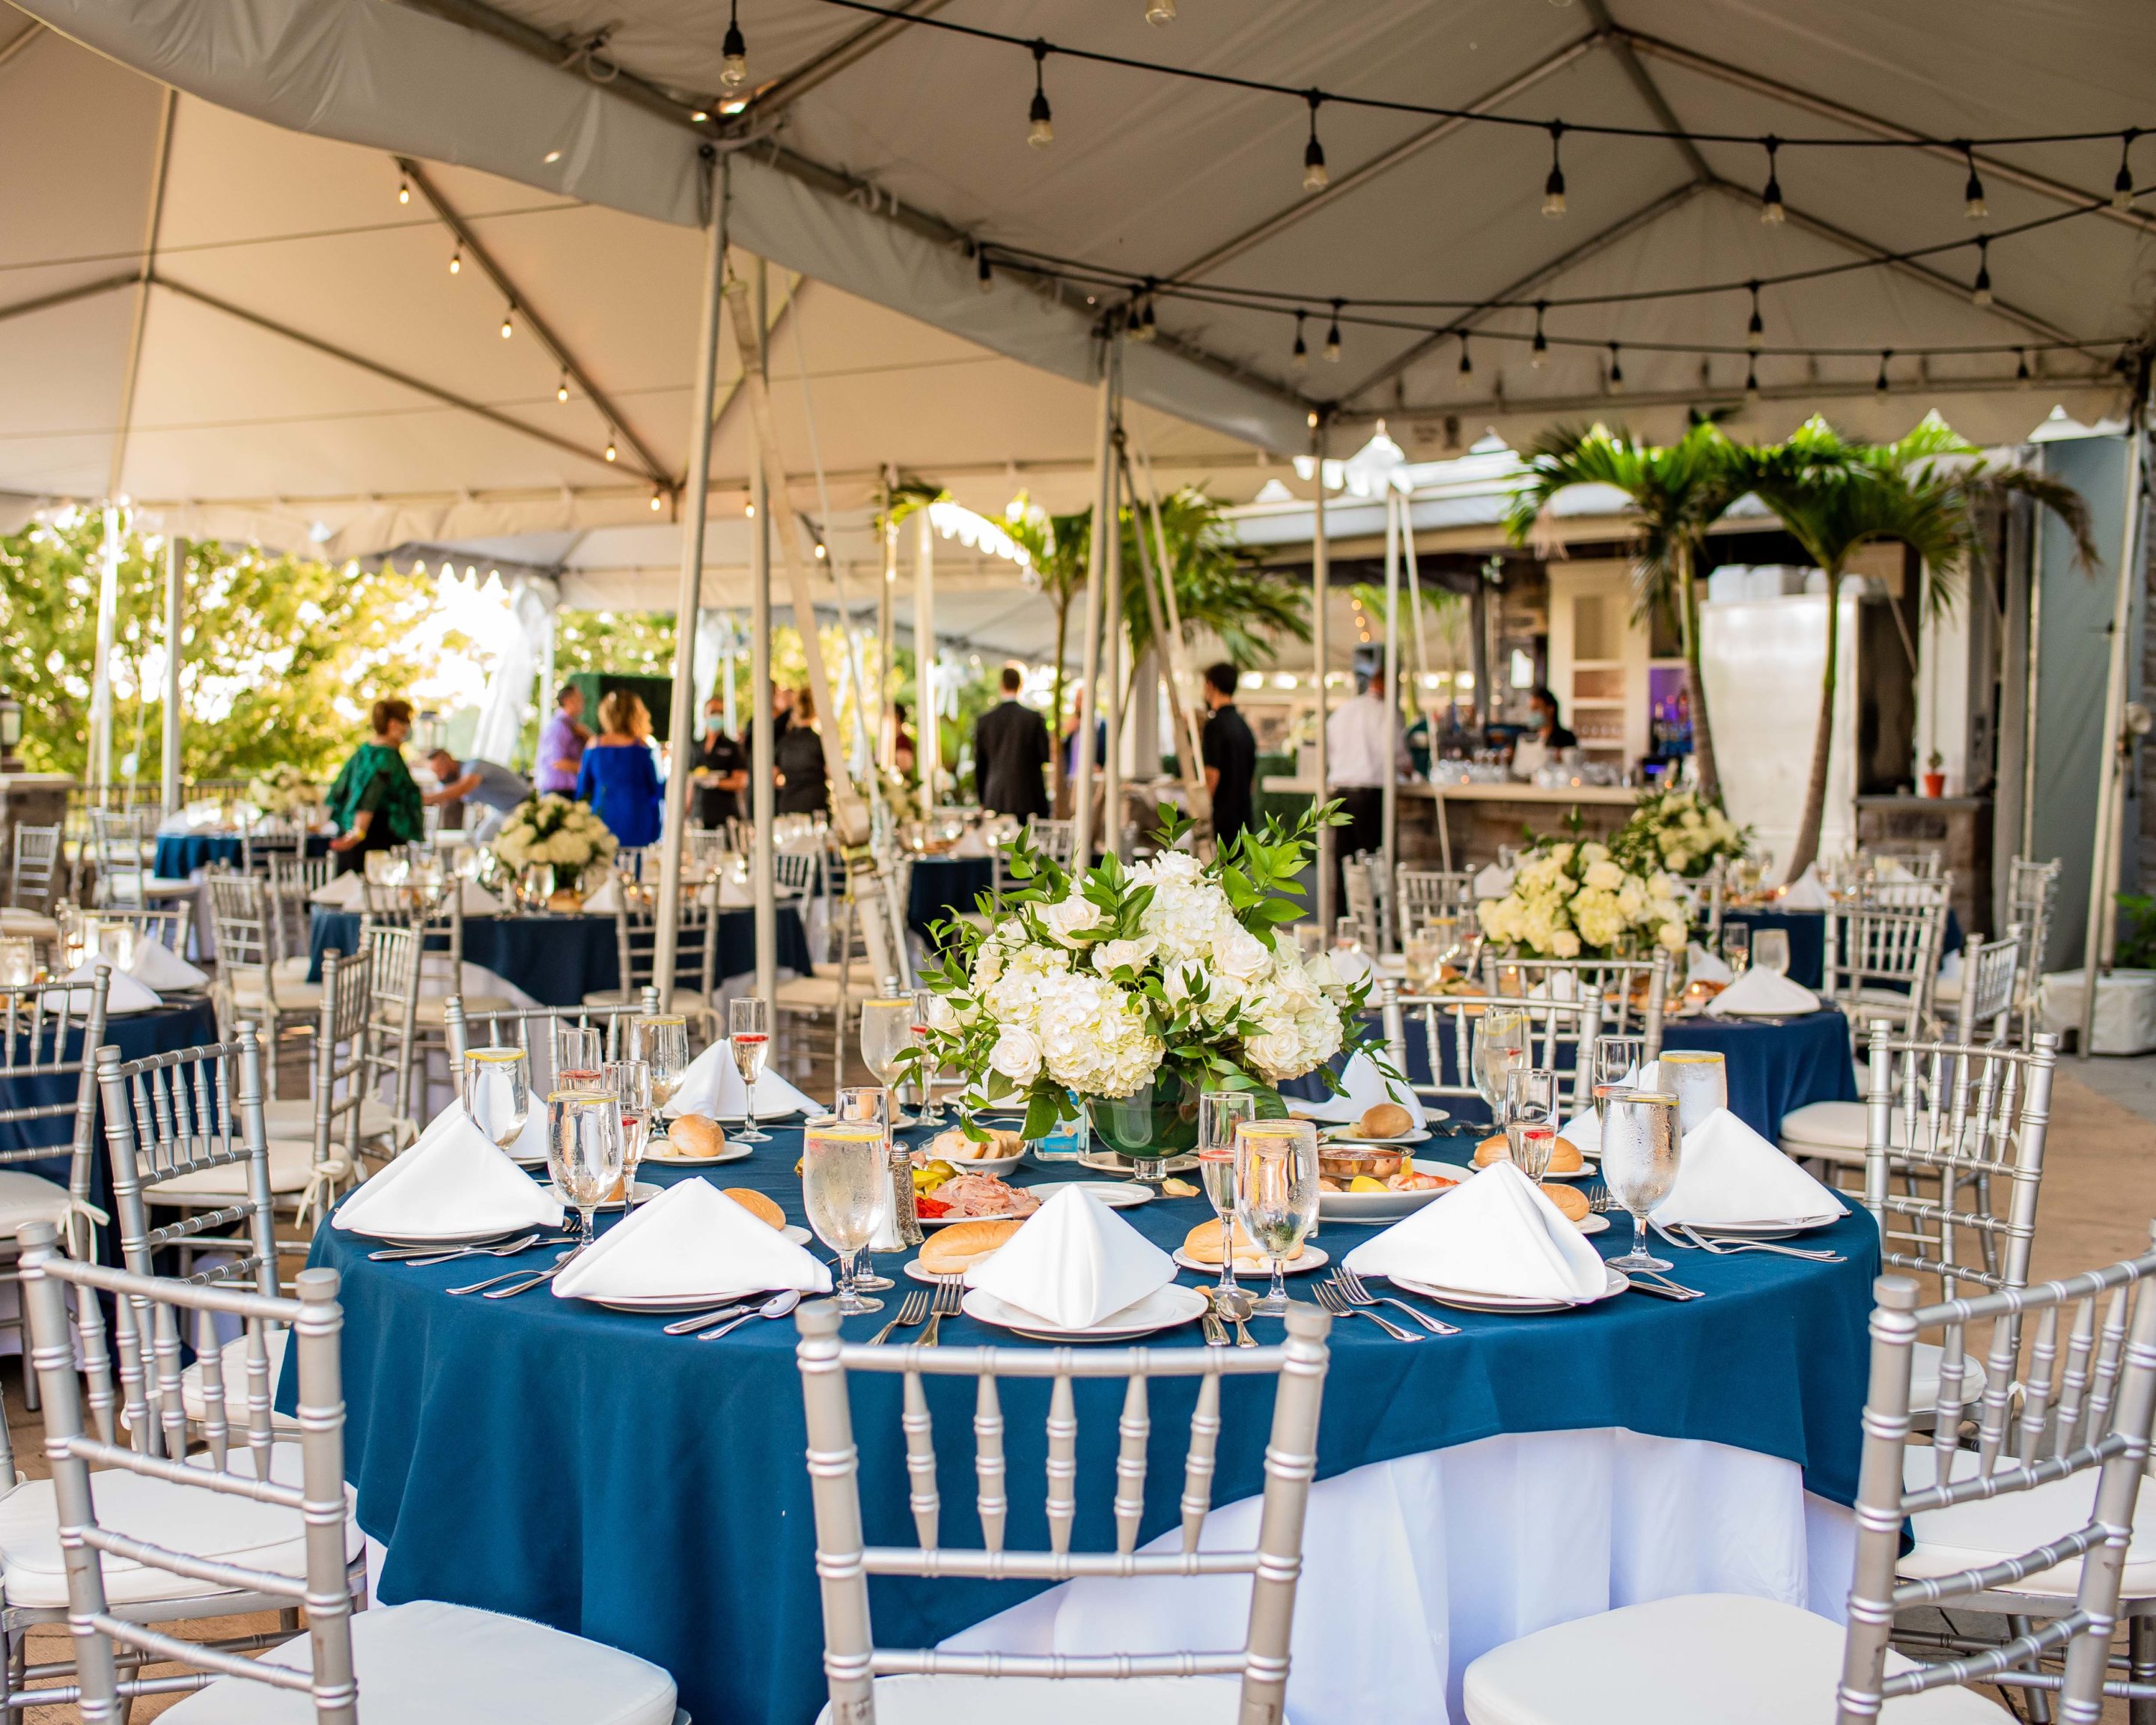 Banquet tables with blue linen and white napkins with foral centerpieces under a canopy tent with lights.